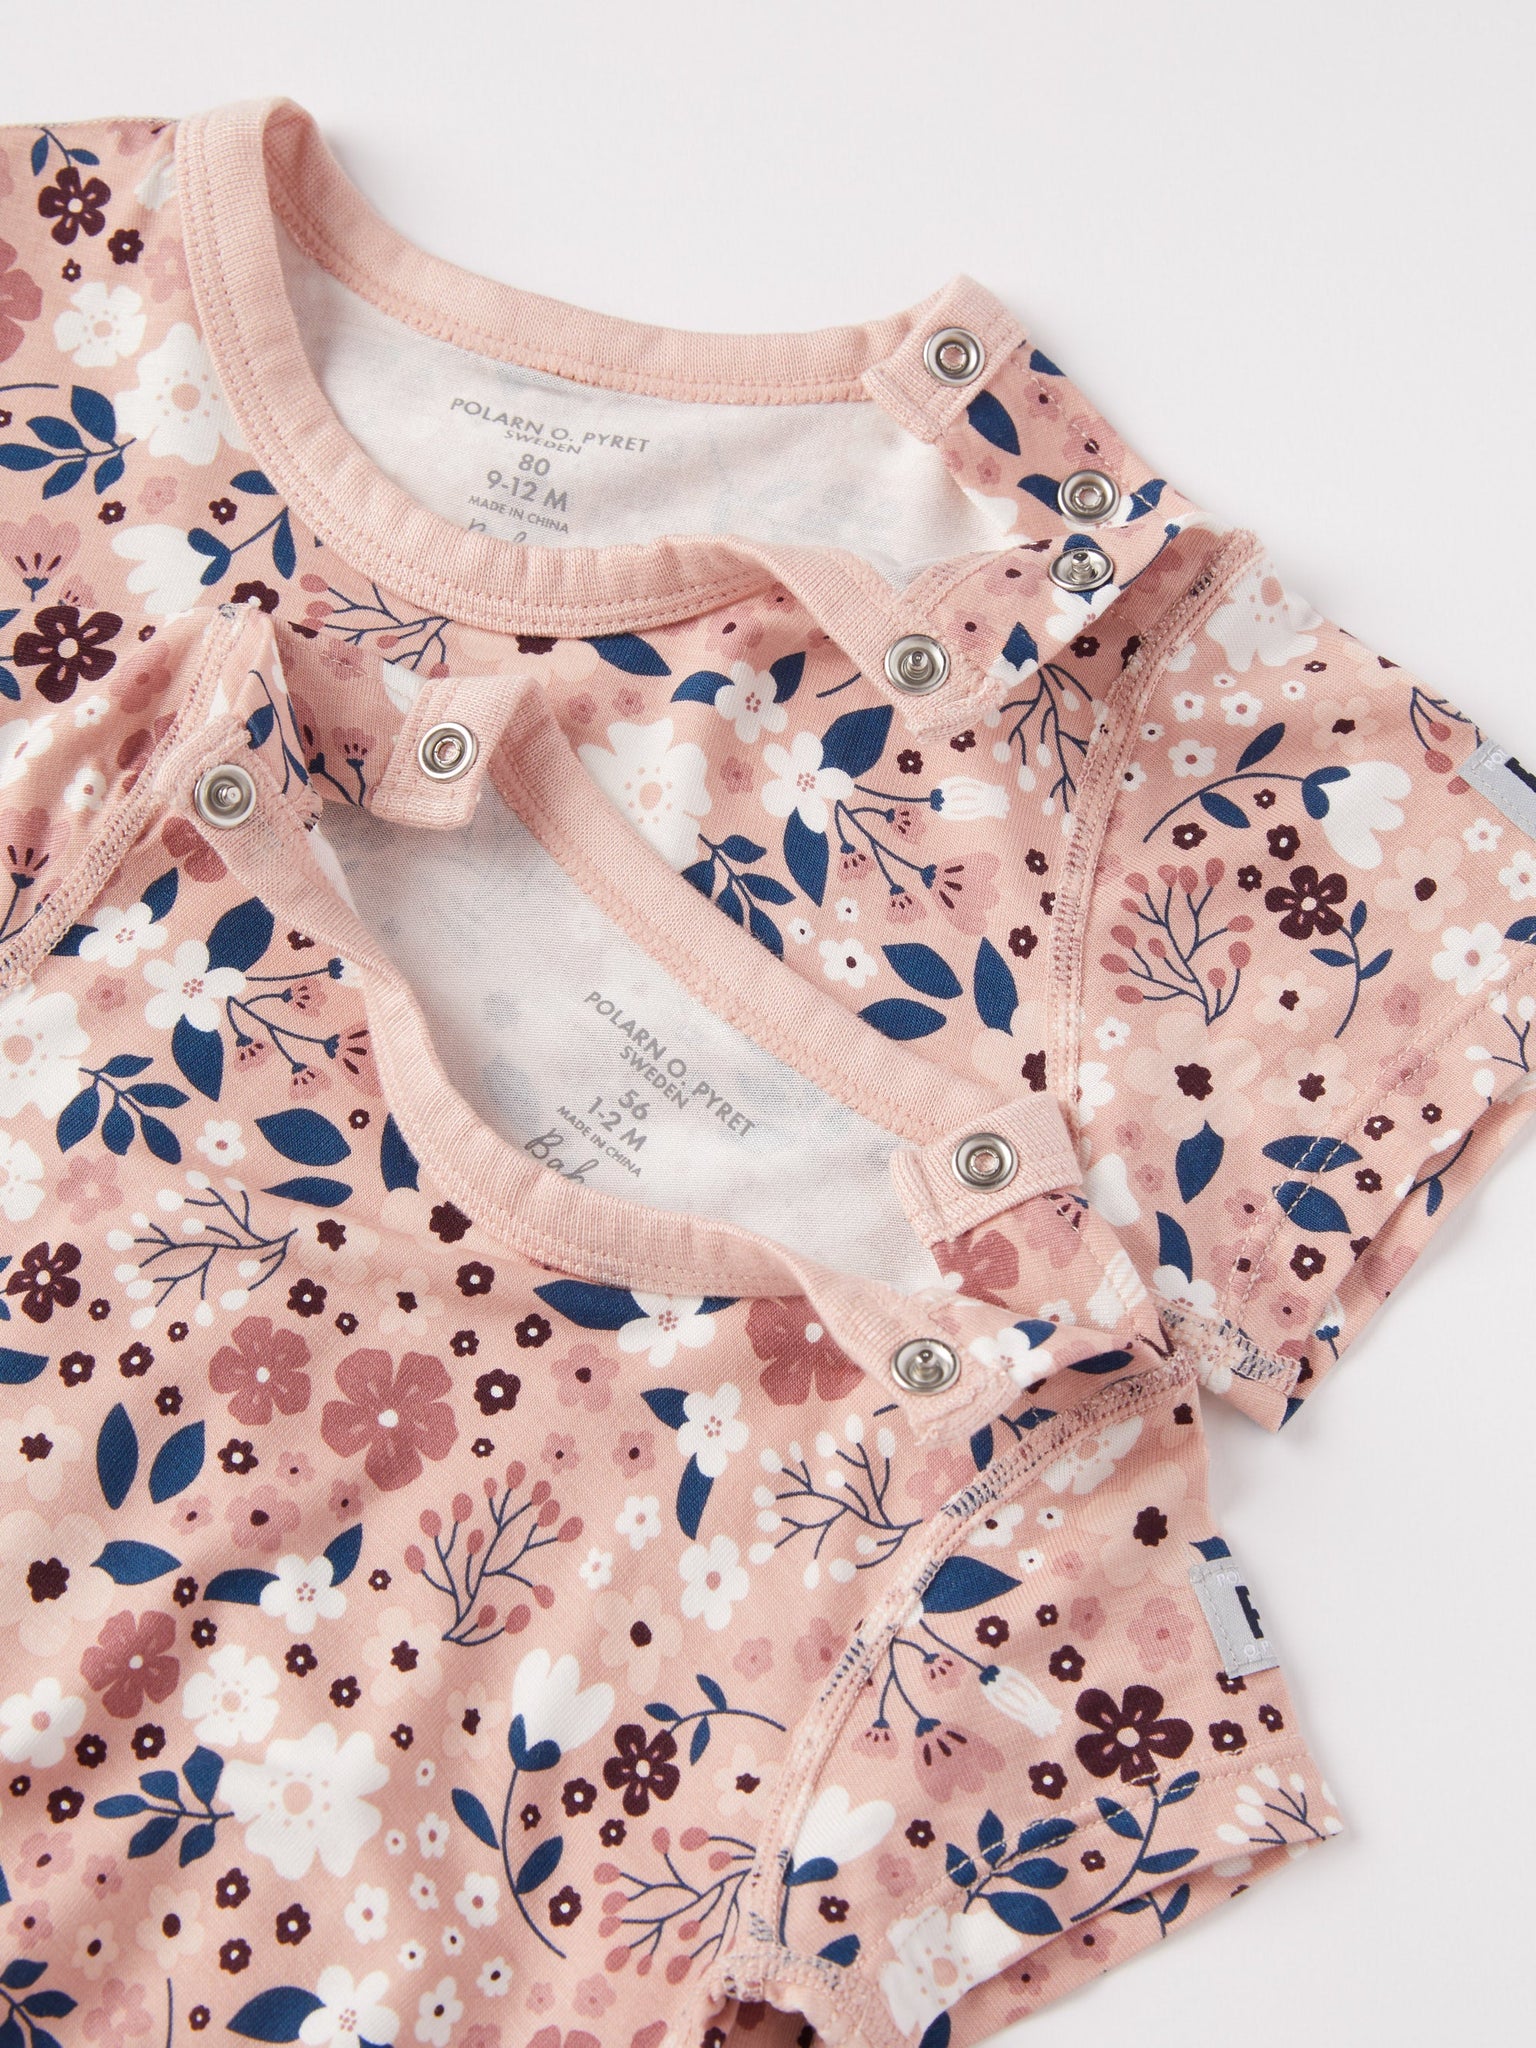 Short Sleeve Ditsy Floral Babygrow from the Polarn O. Pyret baby collection. Clothes made using sustainably sourced materials.